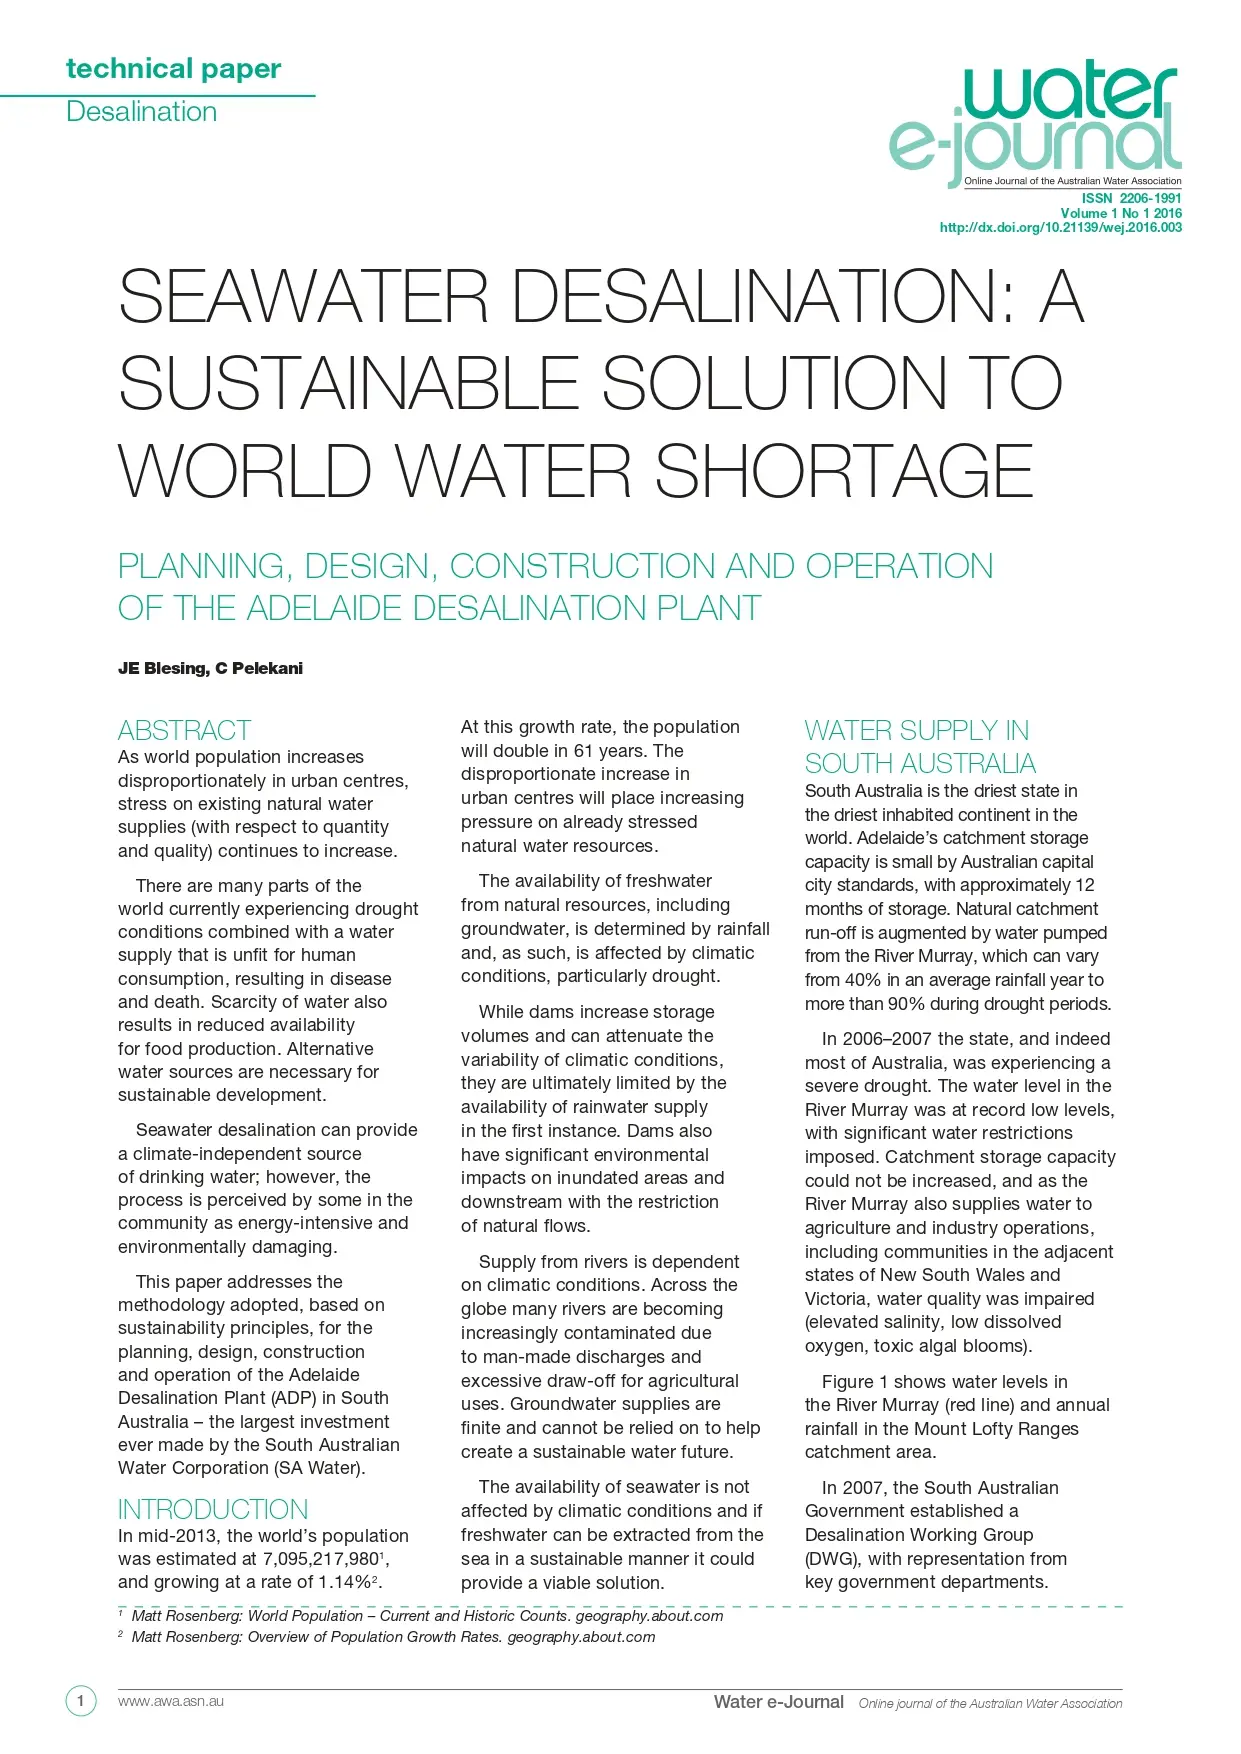 Seawater Desalination: A Sustainable Solution To World Water Shortage